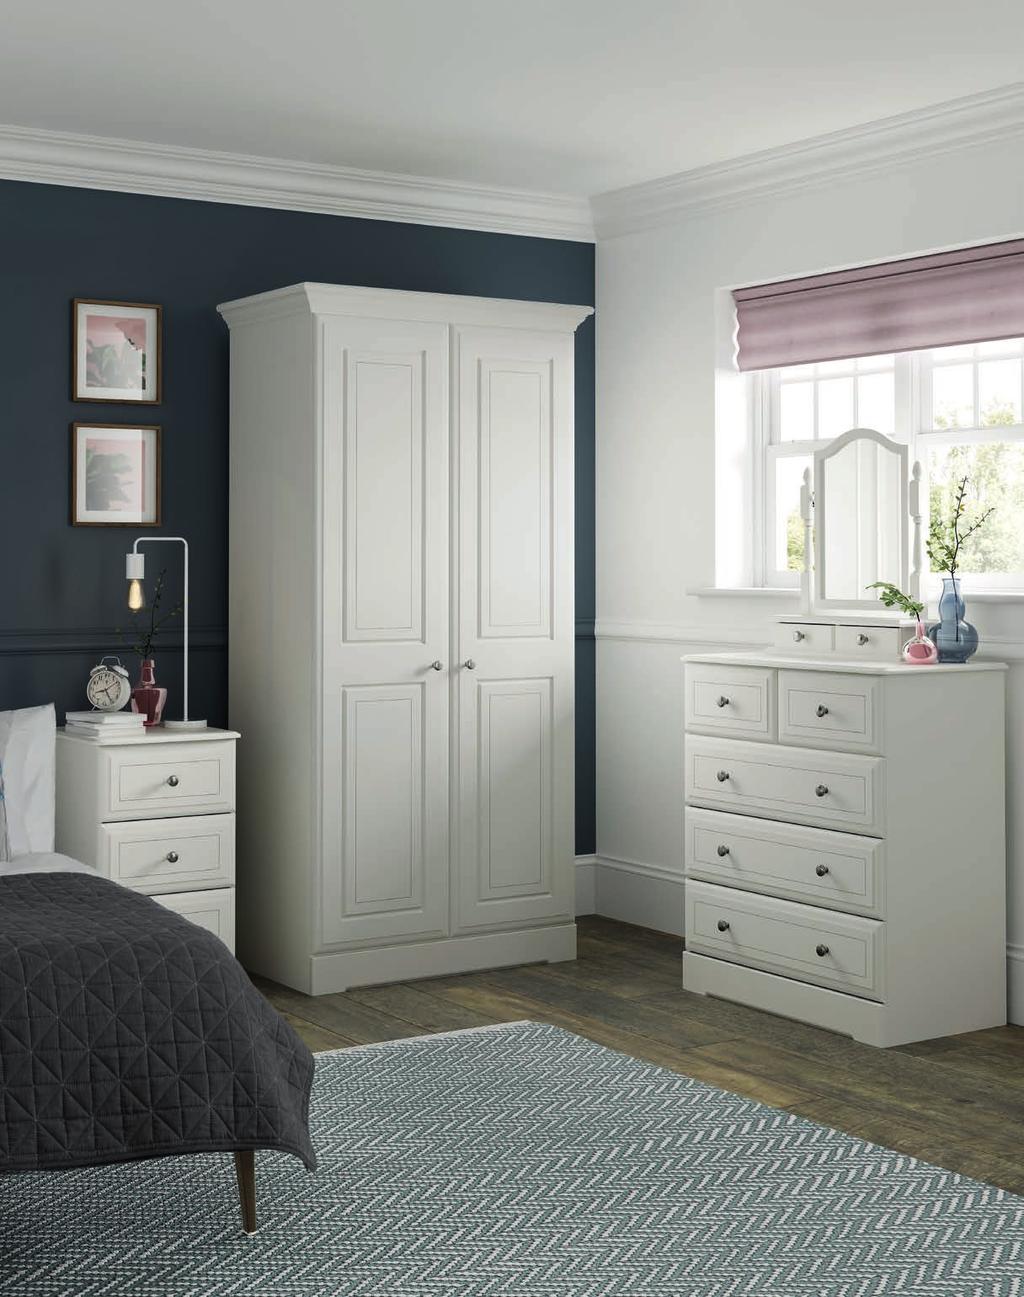 NICOLE KINGSTOWN 27 NICOLE CLASSIC collection painted OF furniture. BEDROOM This bedroom furniture will suit all interiors.